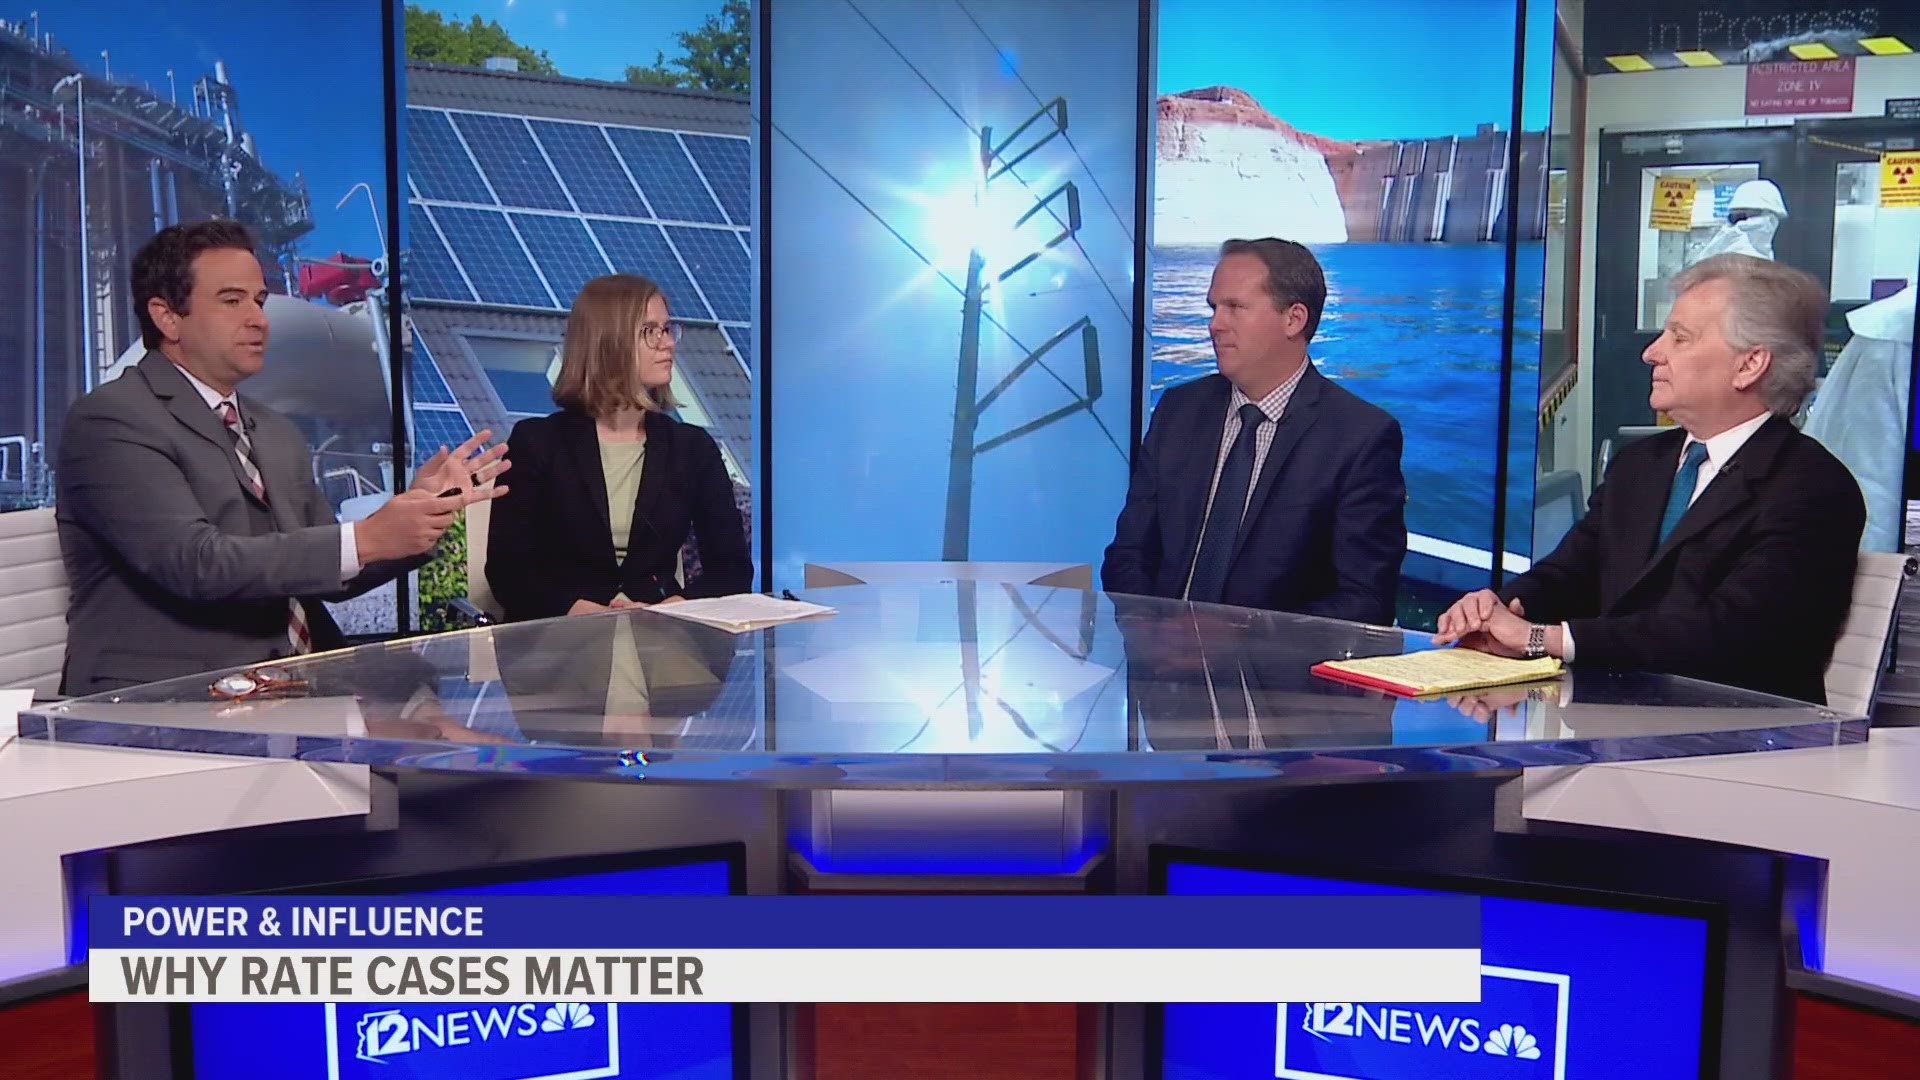 12News sits down with two former Arizona Commissioners and an energy efficiency advocate to discuss.